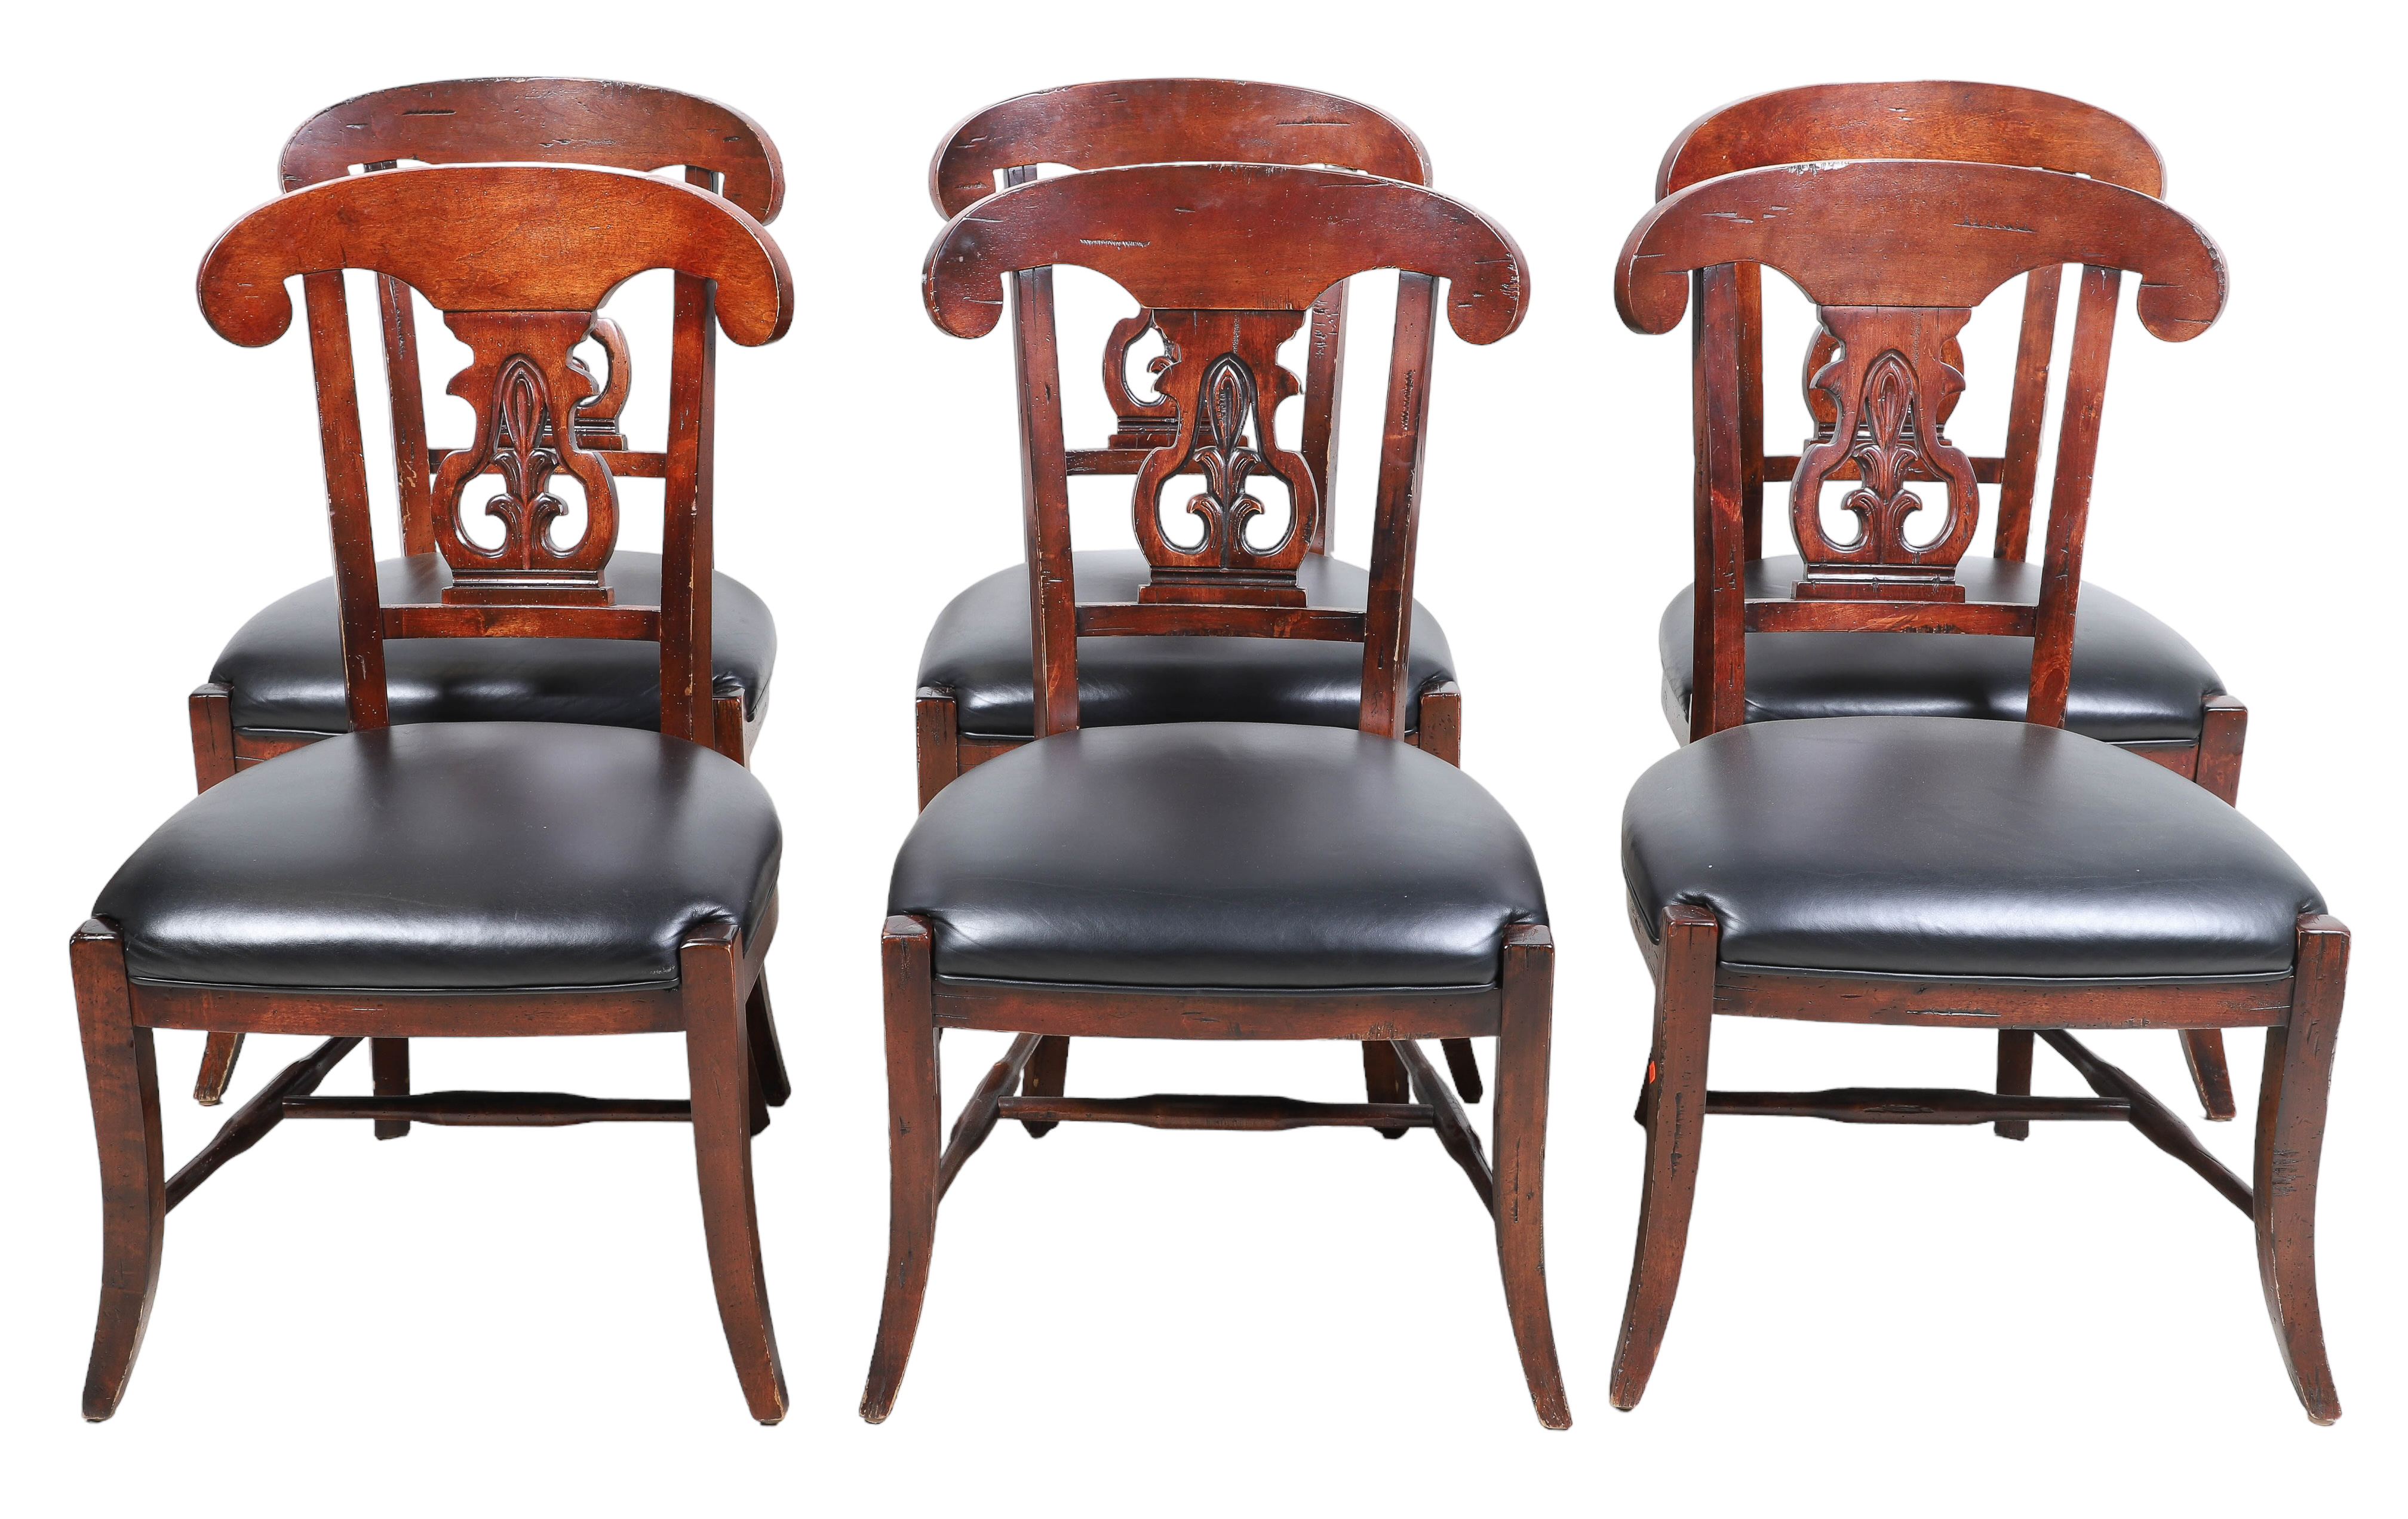  6 Baker style dining chairs  2e19e8